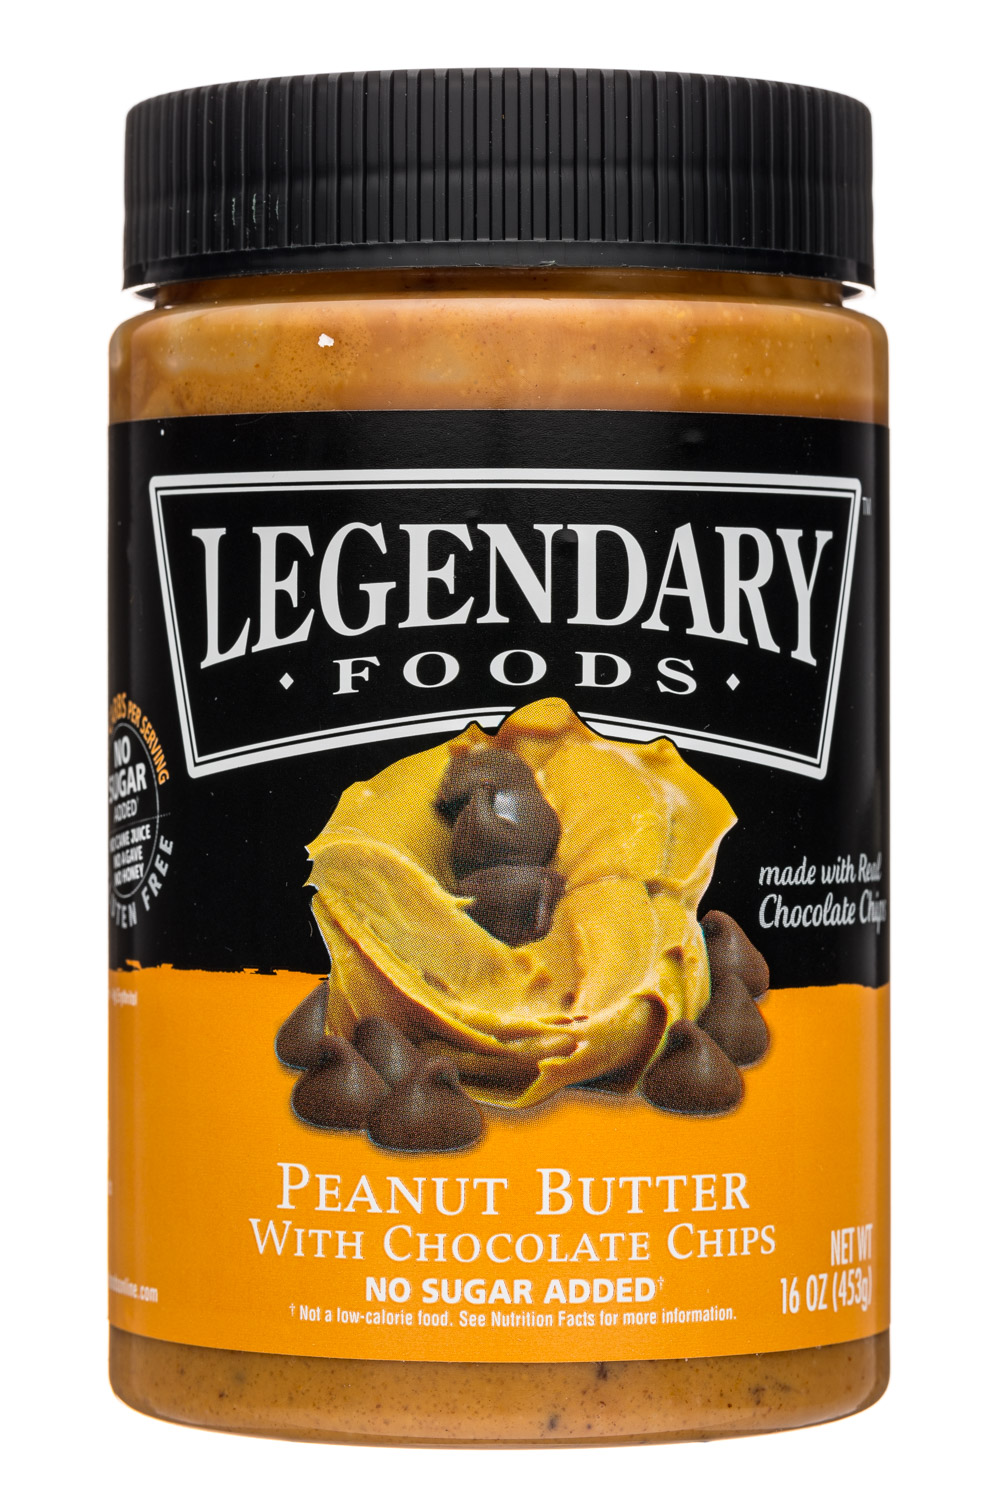 Peanut Butter with Chocolate Chips